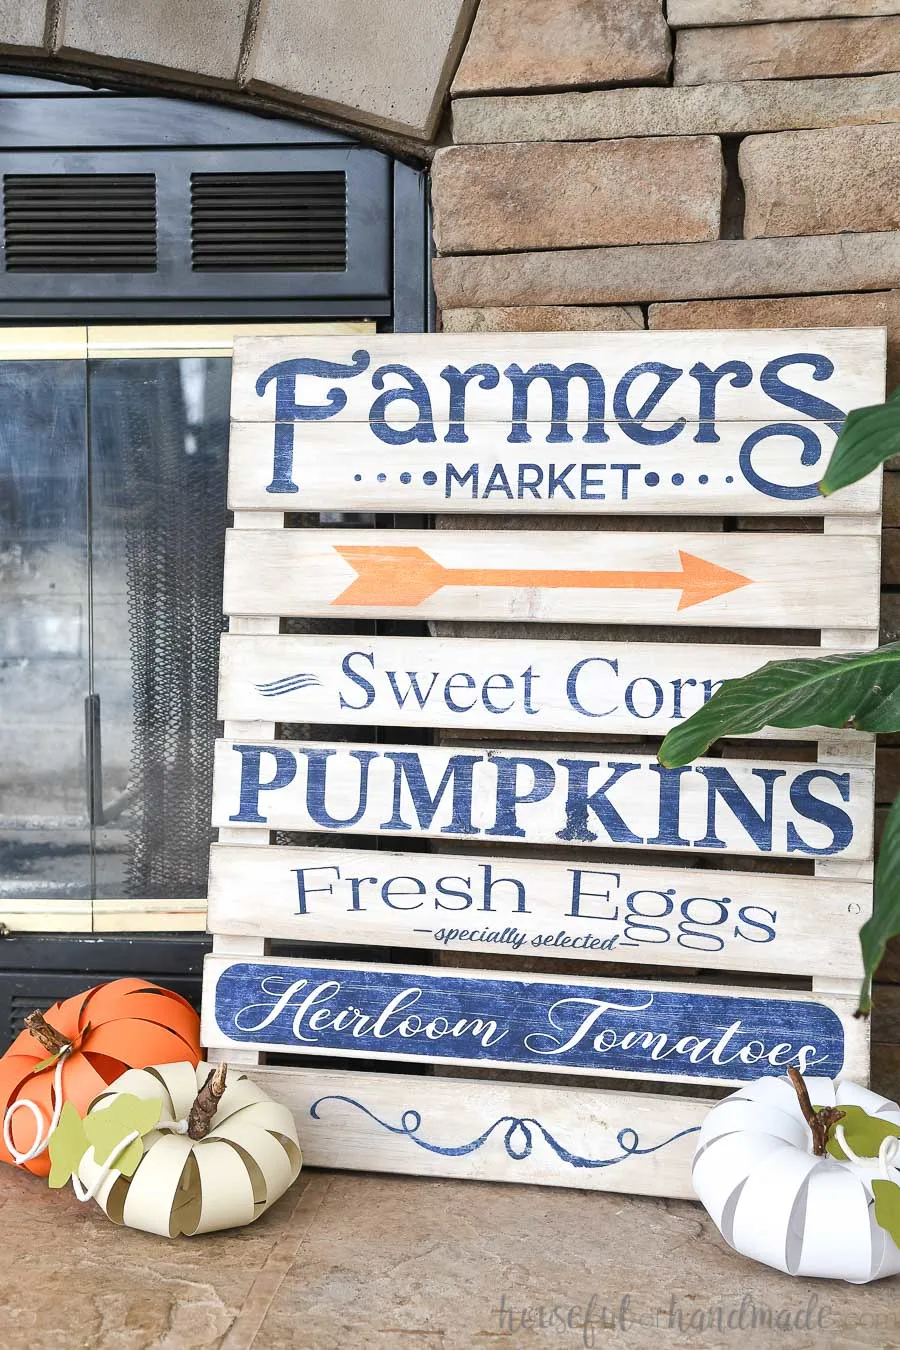 Farmers Market pallet sign on the fireplace hearth with 3 DIY paper pumpkins on the hearth in front of it.